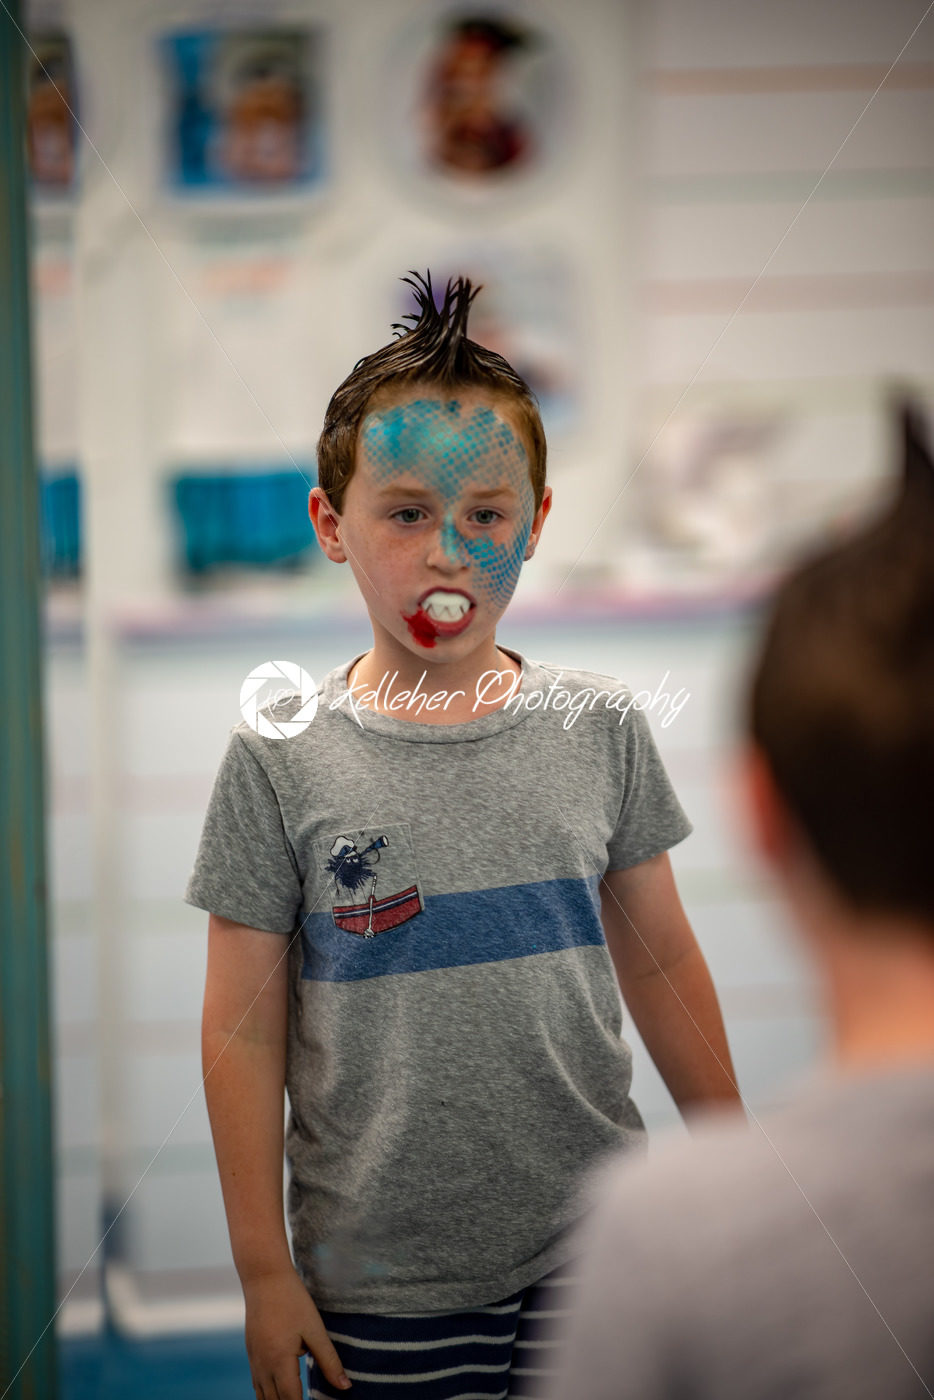 Boy with face painted like a shark - Kelleher Photography Store